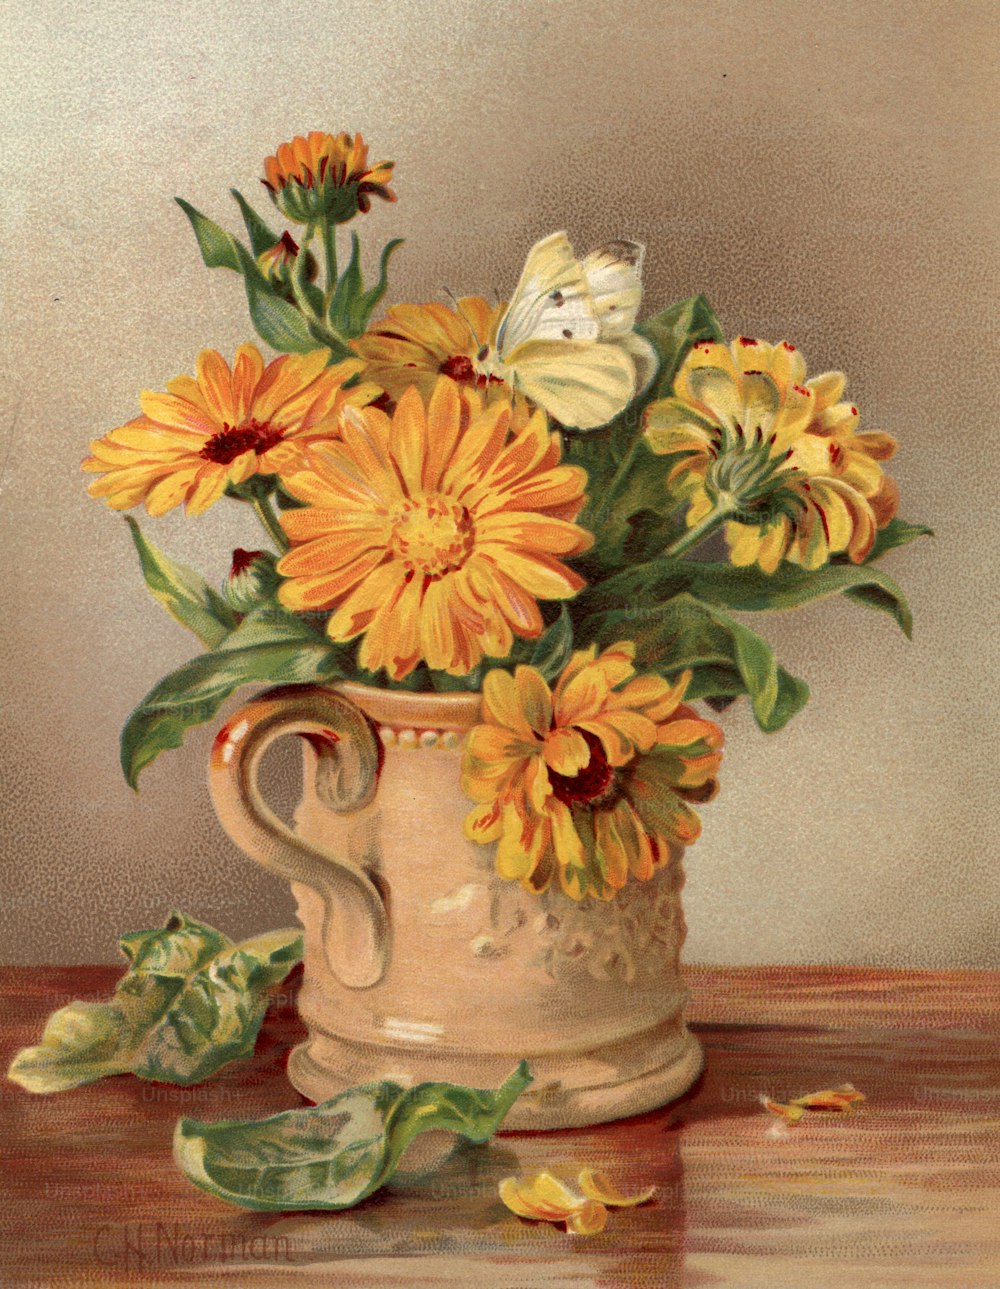 circa 1800:  A butterfly rests on a jug of marigolds.  (Photo by Hulton Archive/Getty Images)